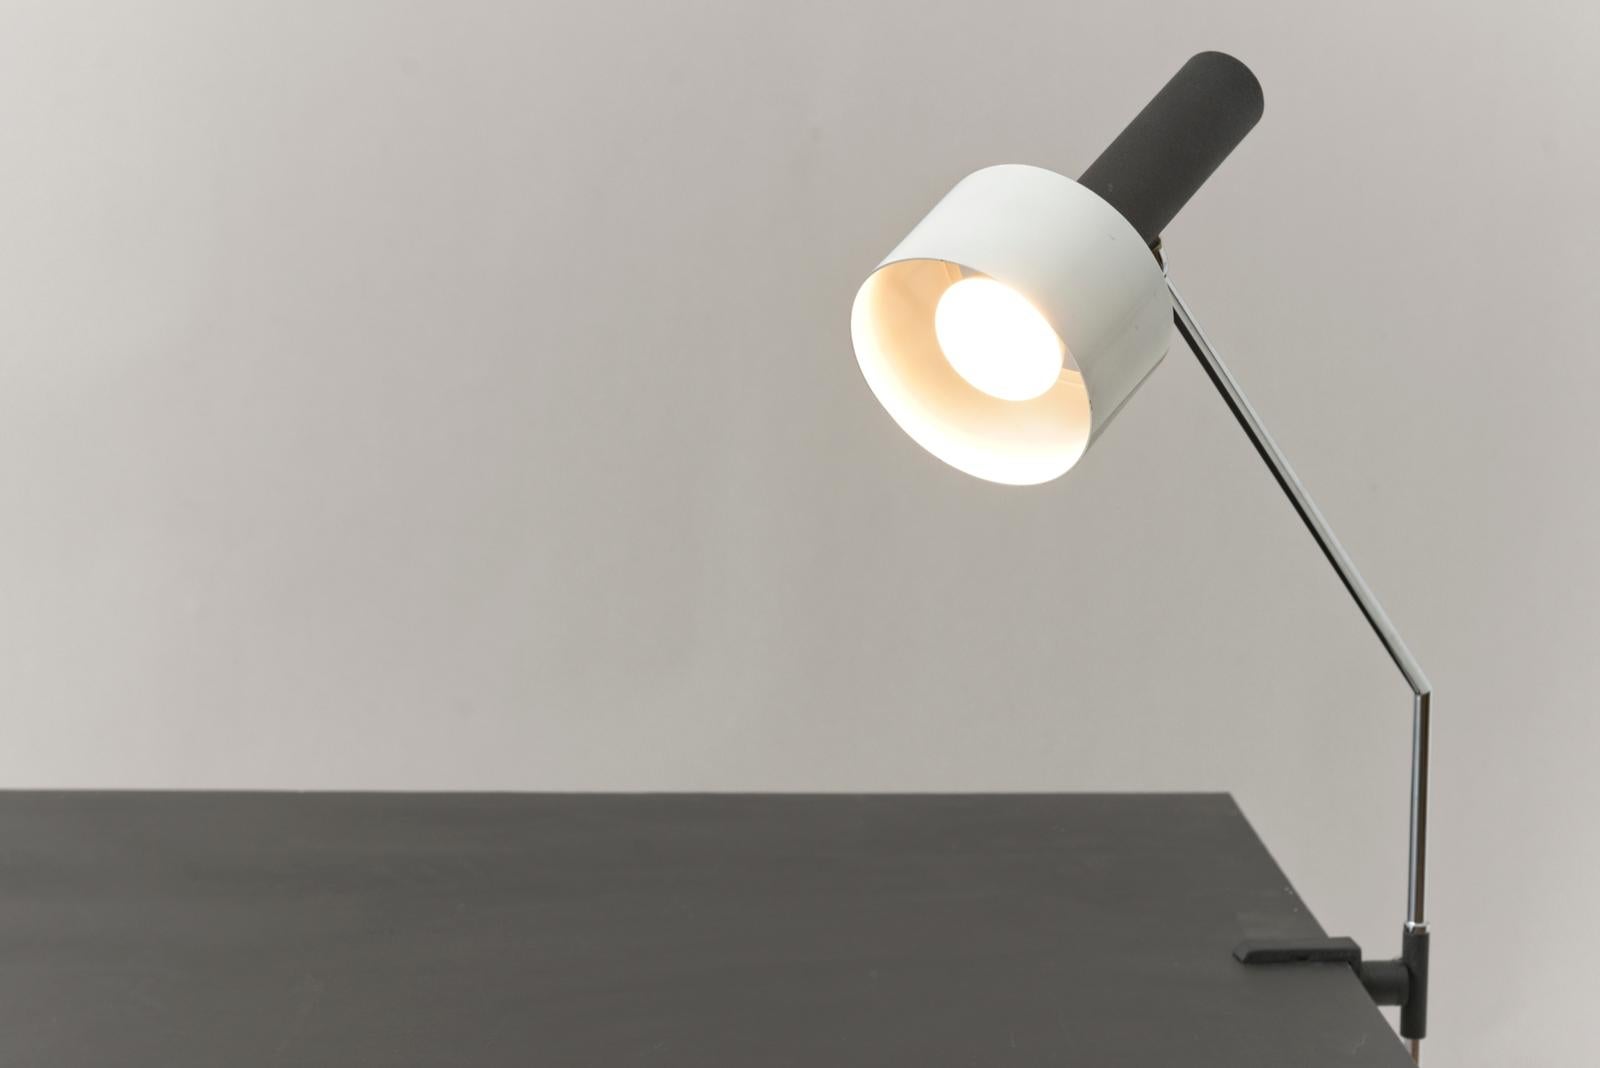 Mid-20th Century Table Lamp in black and white, Switzerland - 1960 For Sale